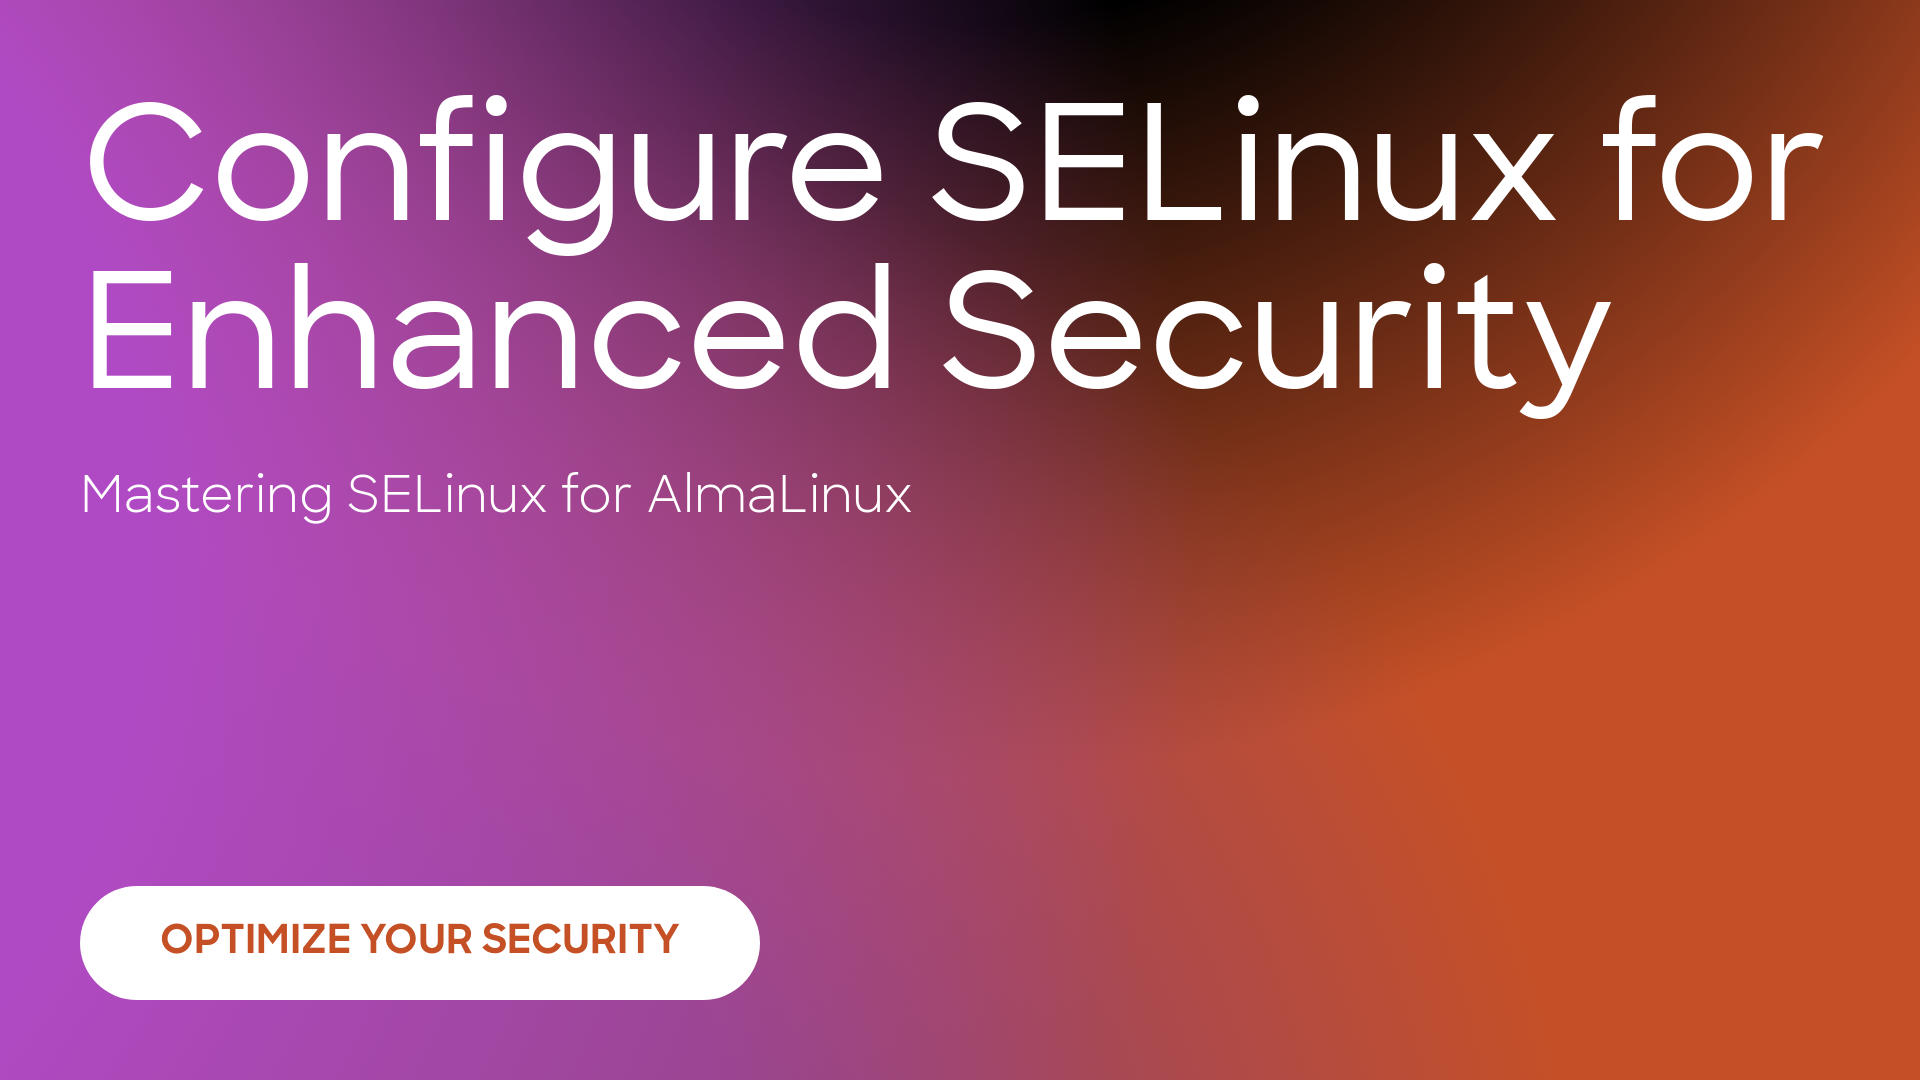 Configuring SELinux for AlmaLinux Security